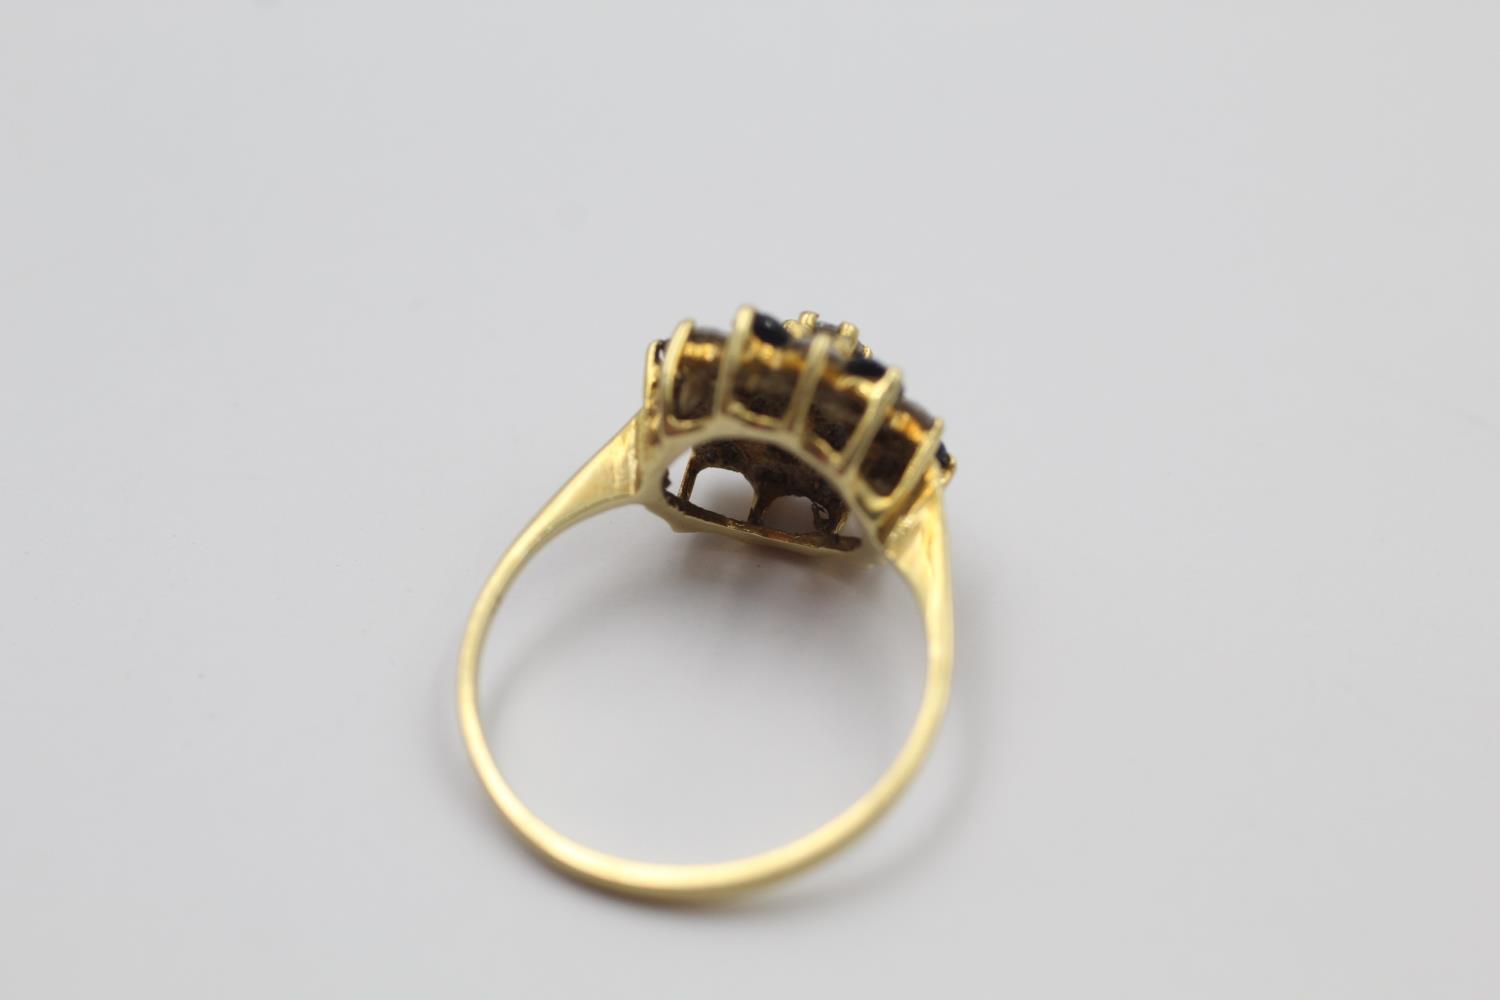 18ct Gold gemstone cluster ring 3.1 grams gross - Image 3 of 4